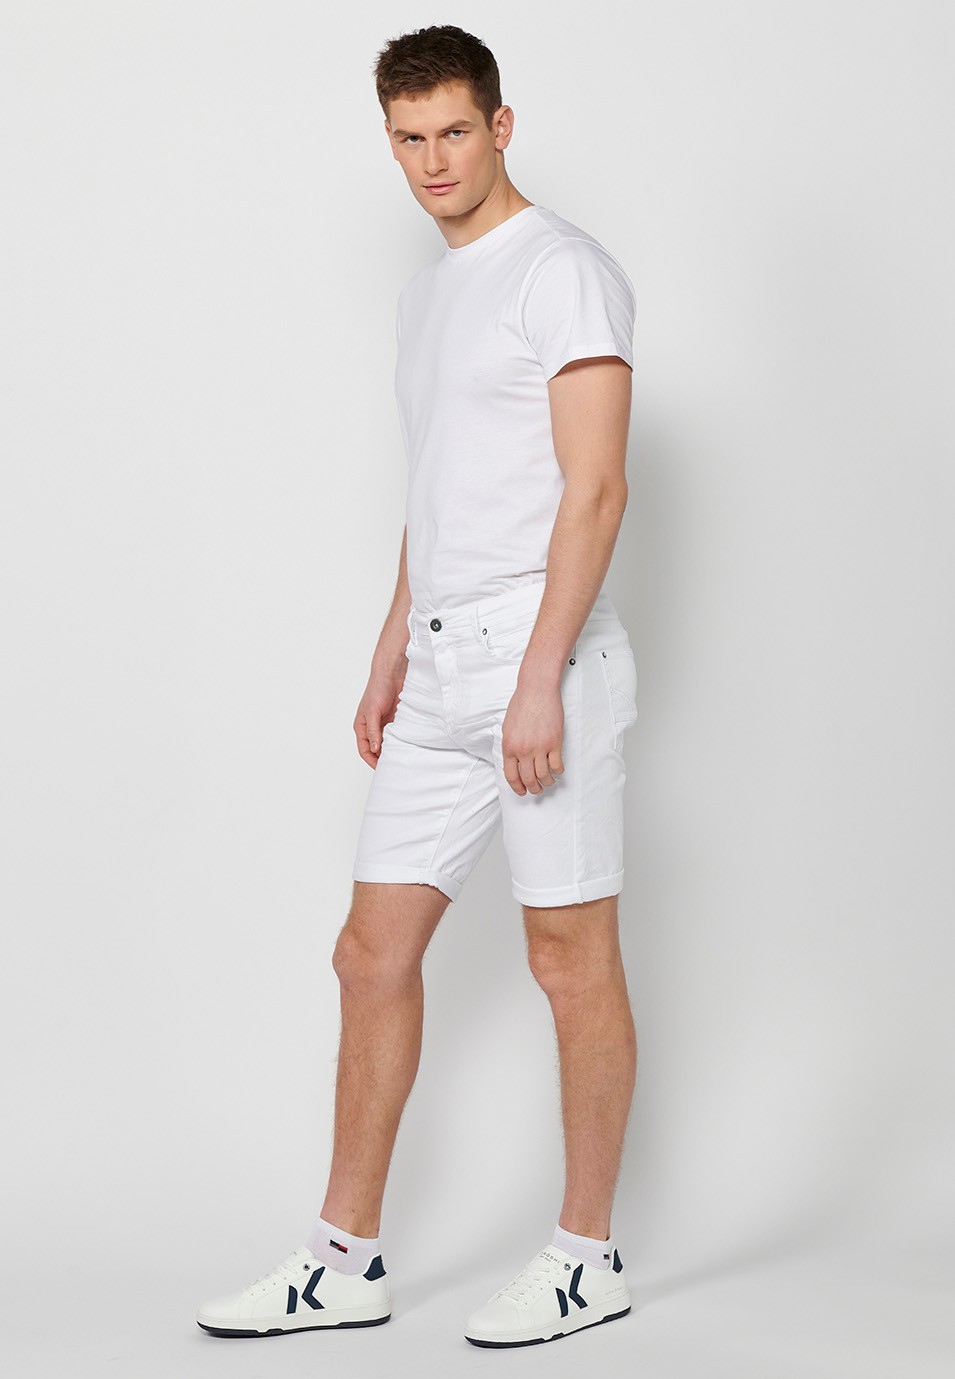 Denim Bermuda shorts with cuffed finish and front zipper and button closure. Five pockets, one match pocket, White for Men